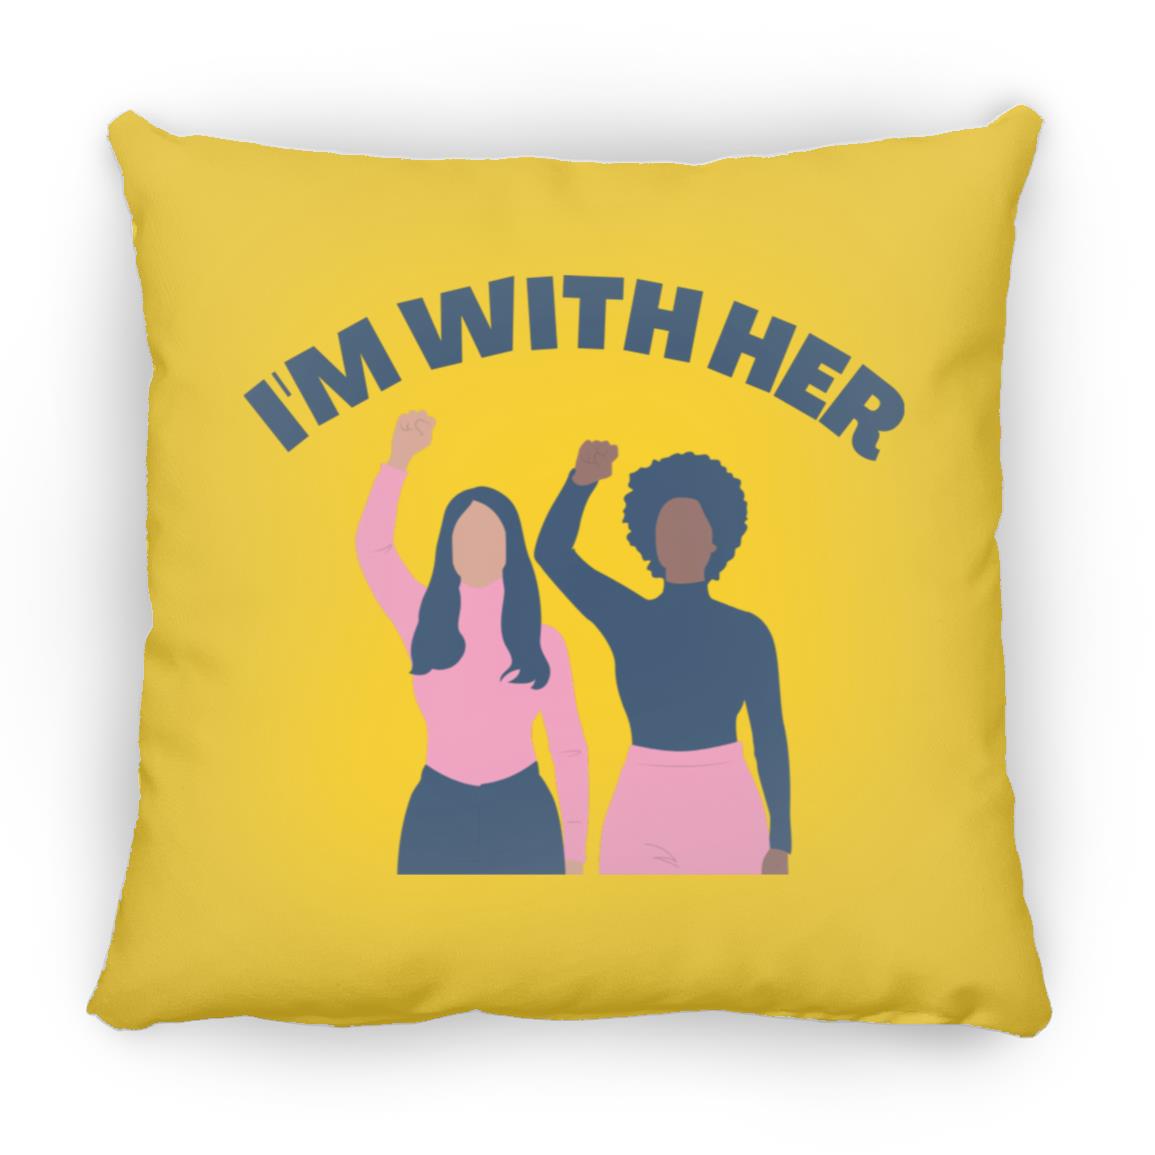 I'm With Her Throw Pillow